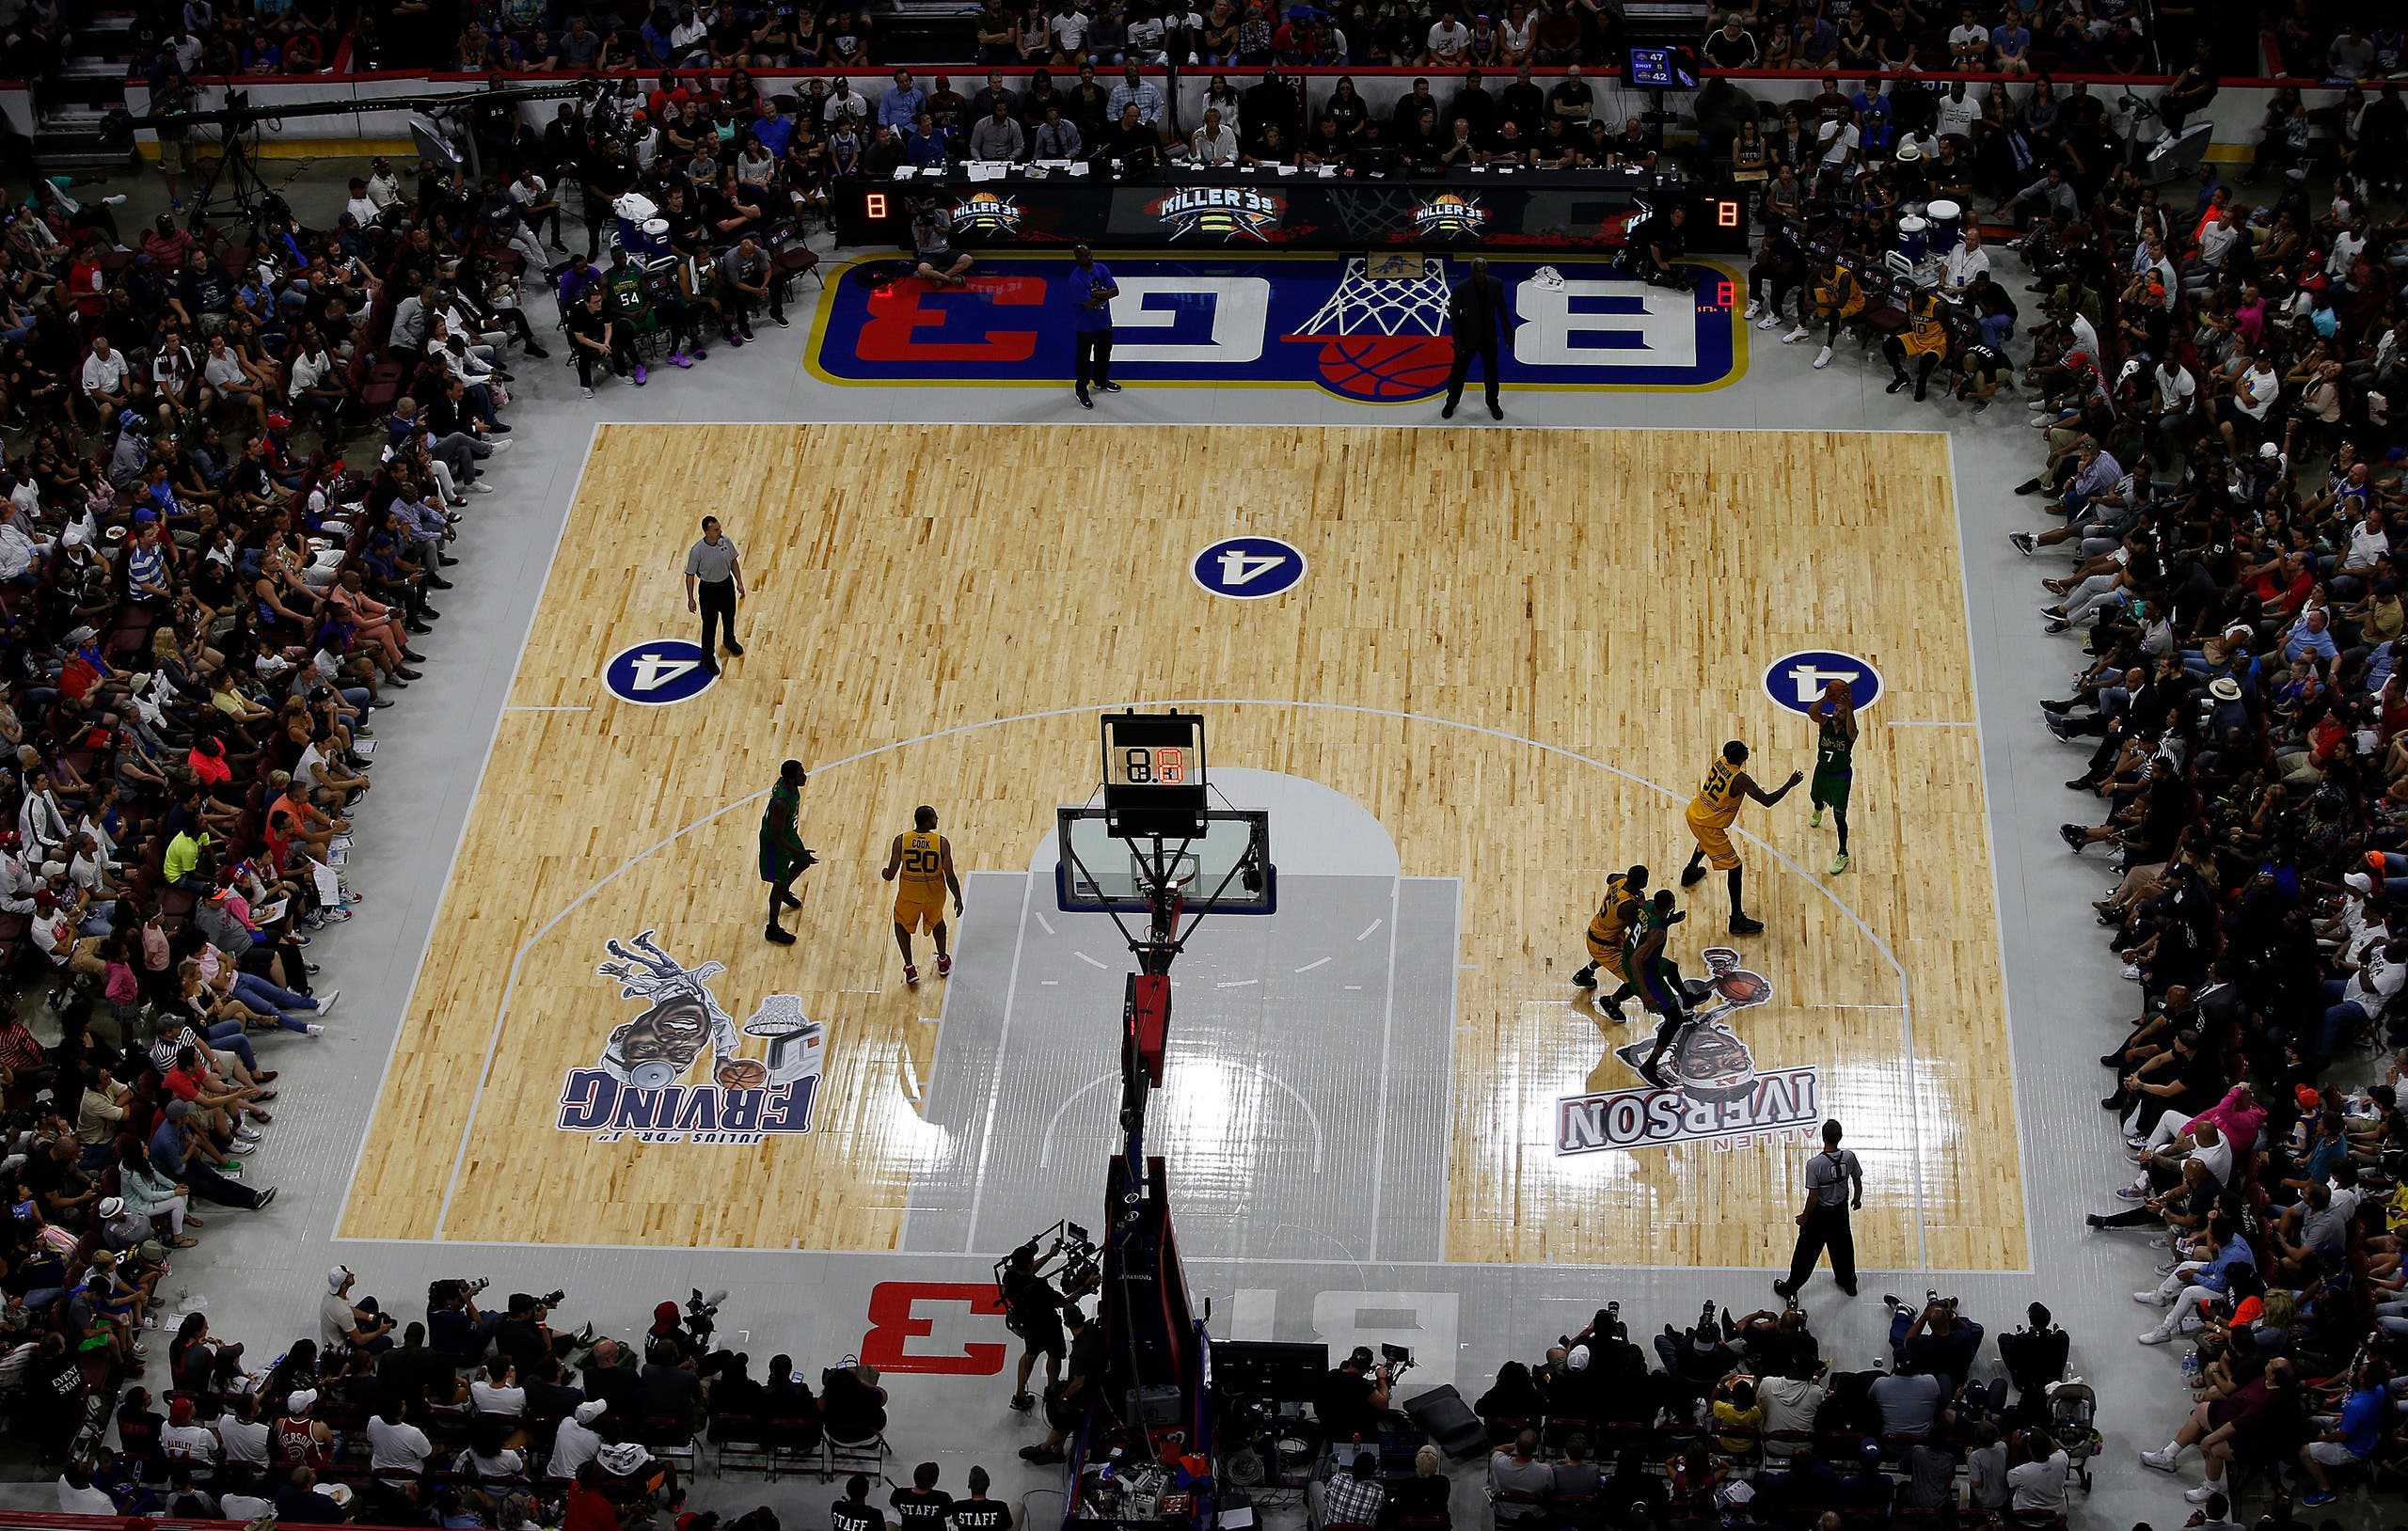 The Big3 league in action on July 16, 2017. The Killer 3's play the 3 Headed Monsters during a BIG3 basketball game in Philadelphia, Pa. (AP)